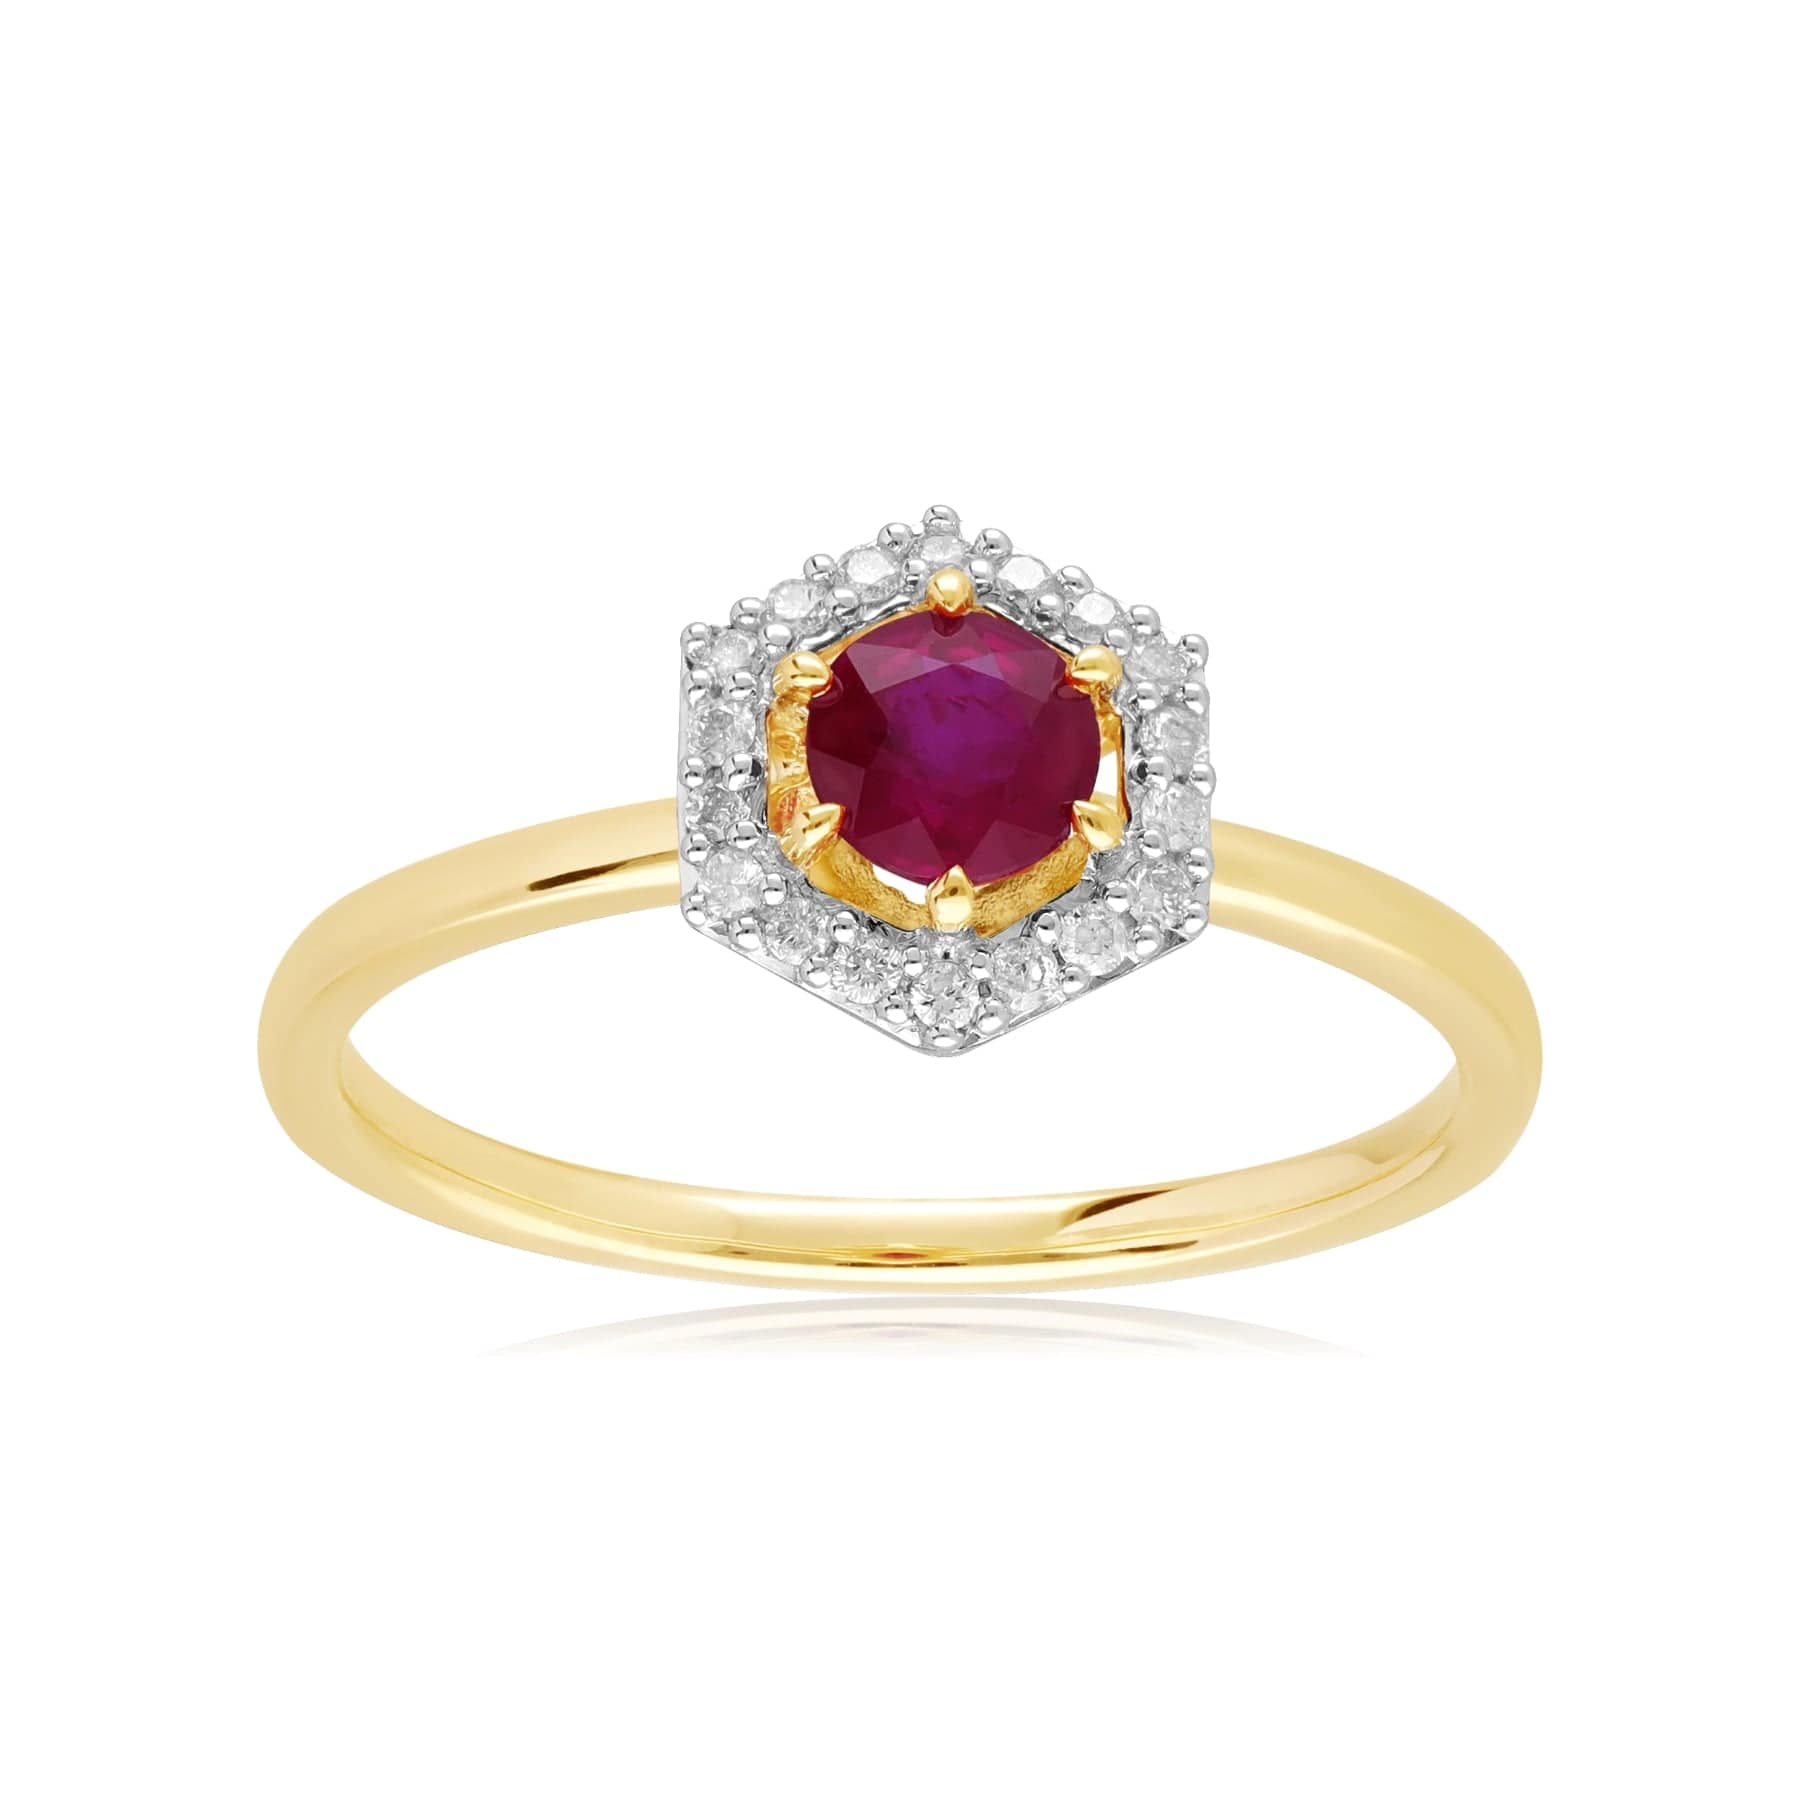 133R9486039 9ct Yellow Gold 0.92ct Ruby & Diamond Halo Engagement Ring 4